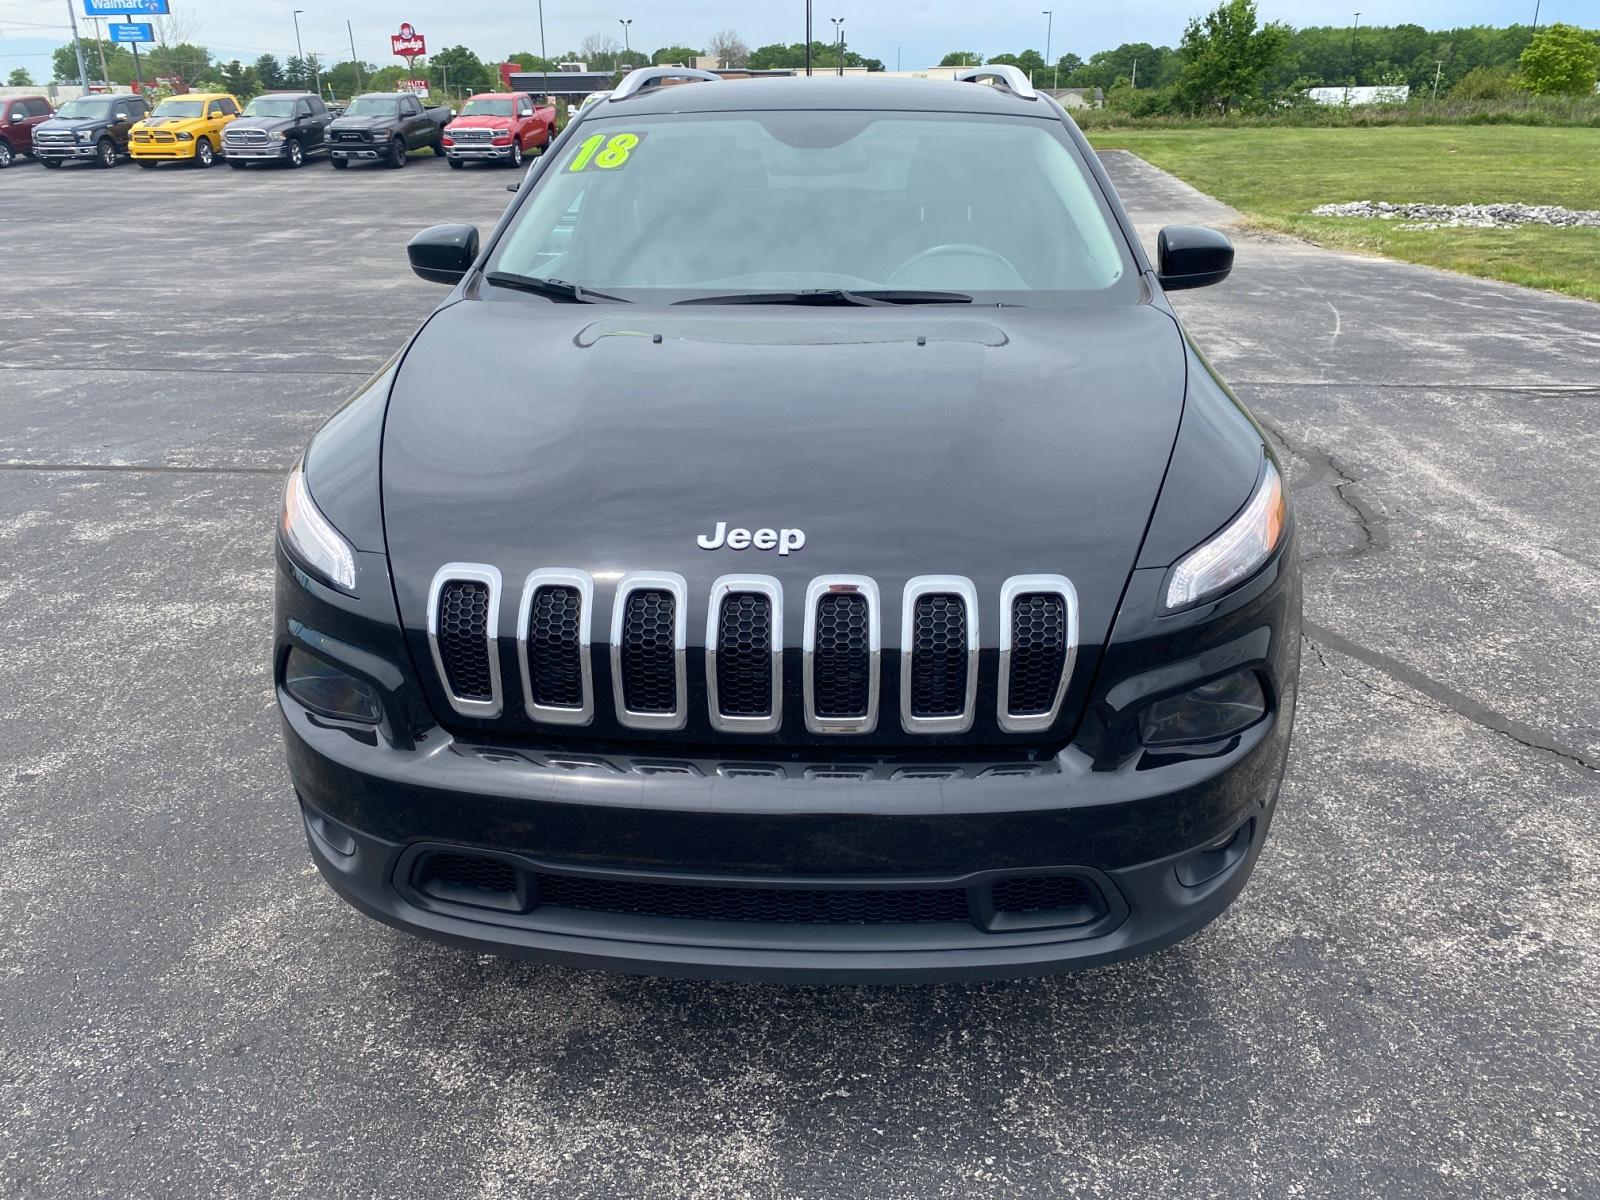 Pre-Owned 2018 Jeep Cherokee Latitude Plus 4x4 Sport Utility in Monticello #20X168A | Twin Lakes Tire Size For 2018 Jeep Cherokee Latitude